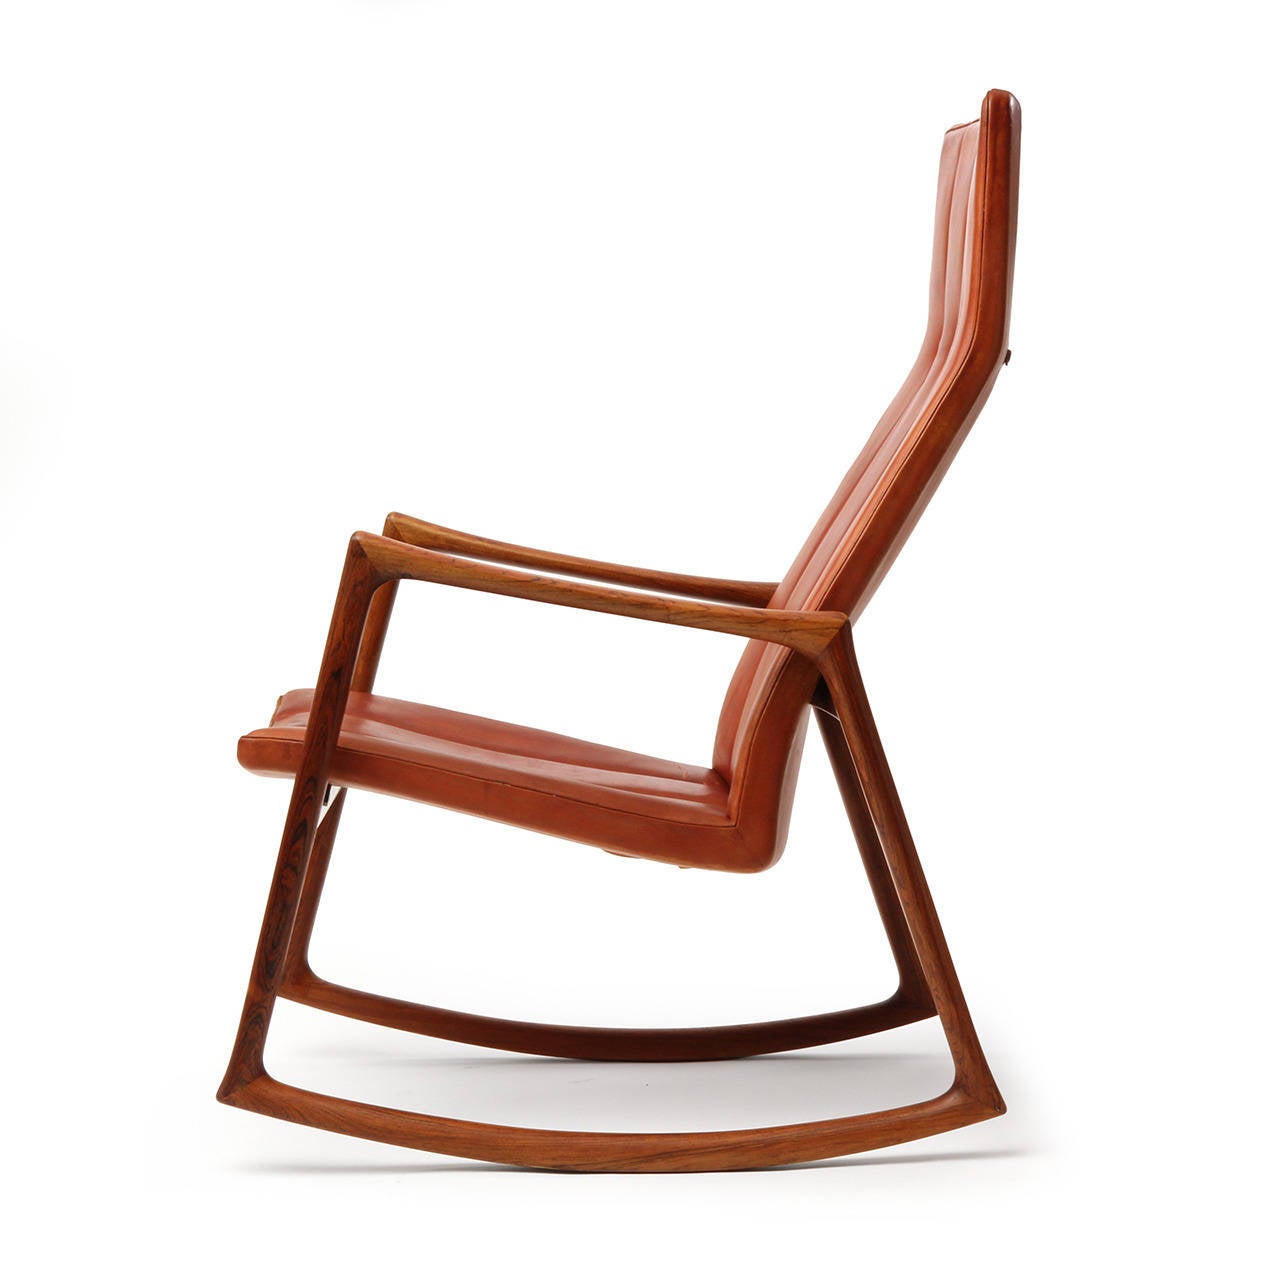 A sculptural, spare and superbly crafted rocking chair having an open frame of solid Brazilian rosewood supporting a floating ergonomic seat that retains its original tailored channeled caramel natural leather upholstery and adjustable headrest.